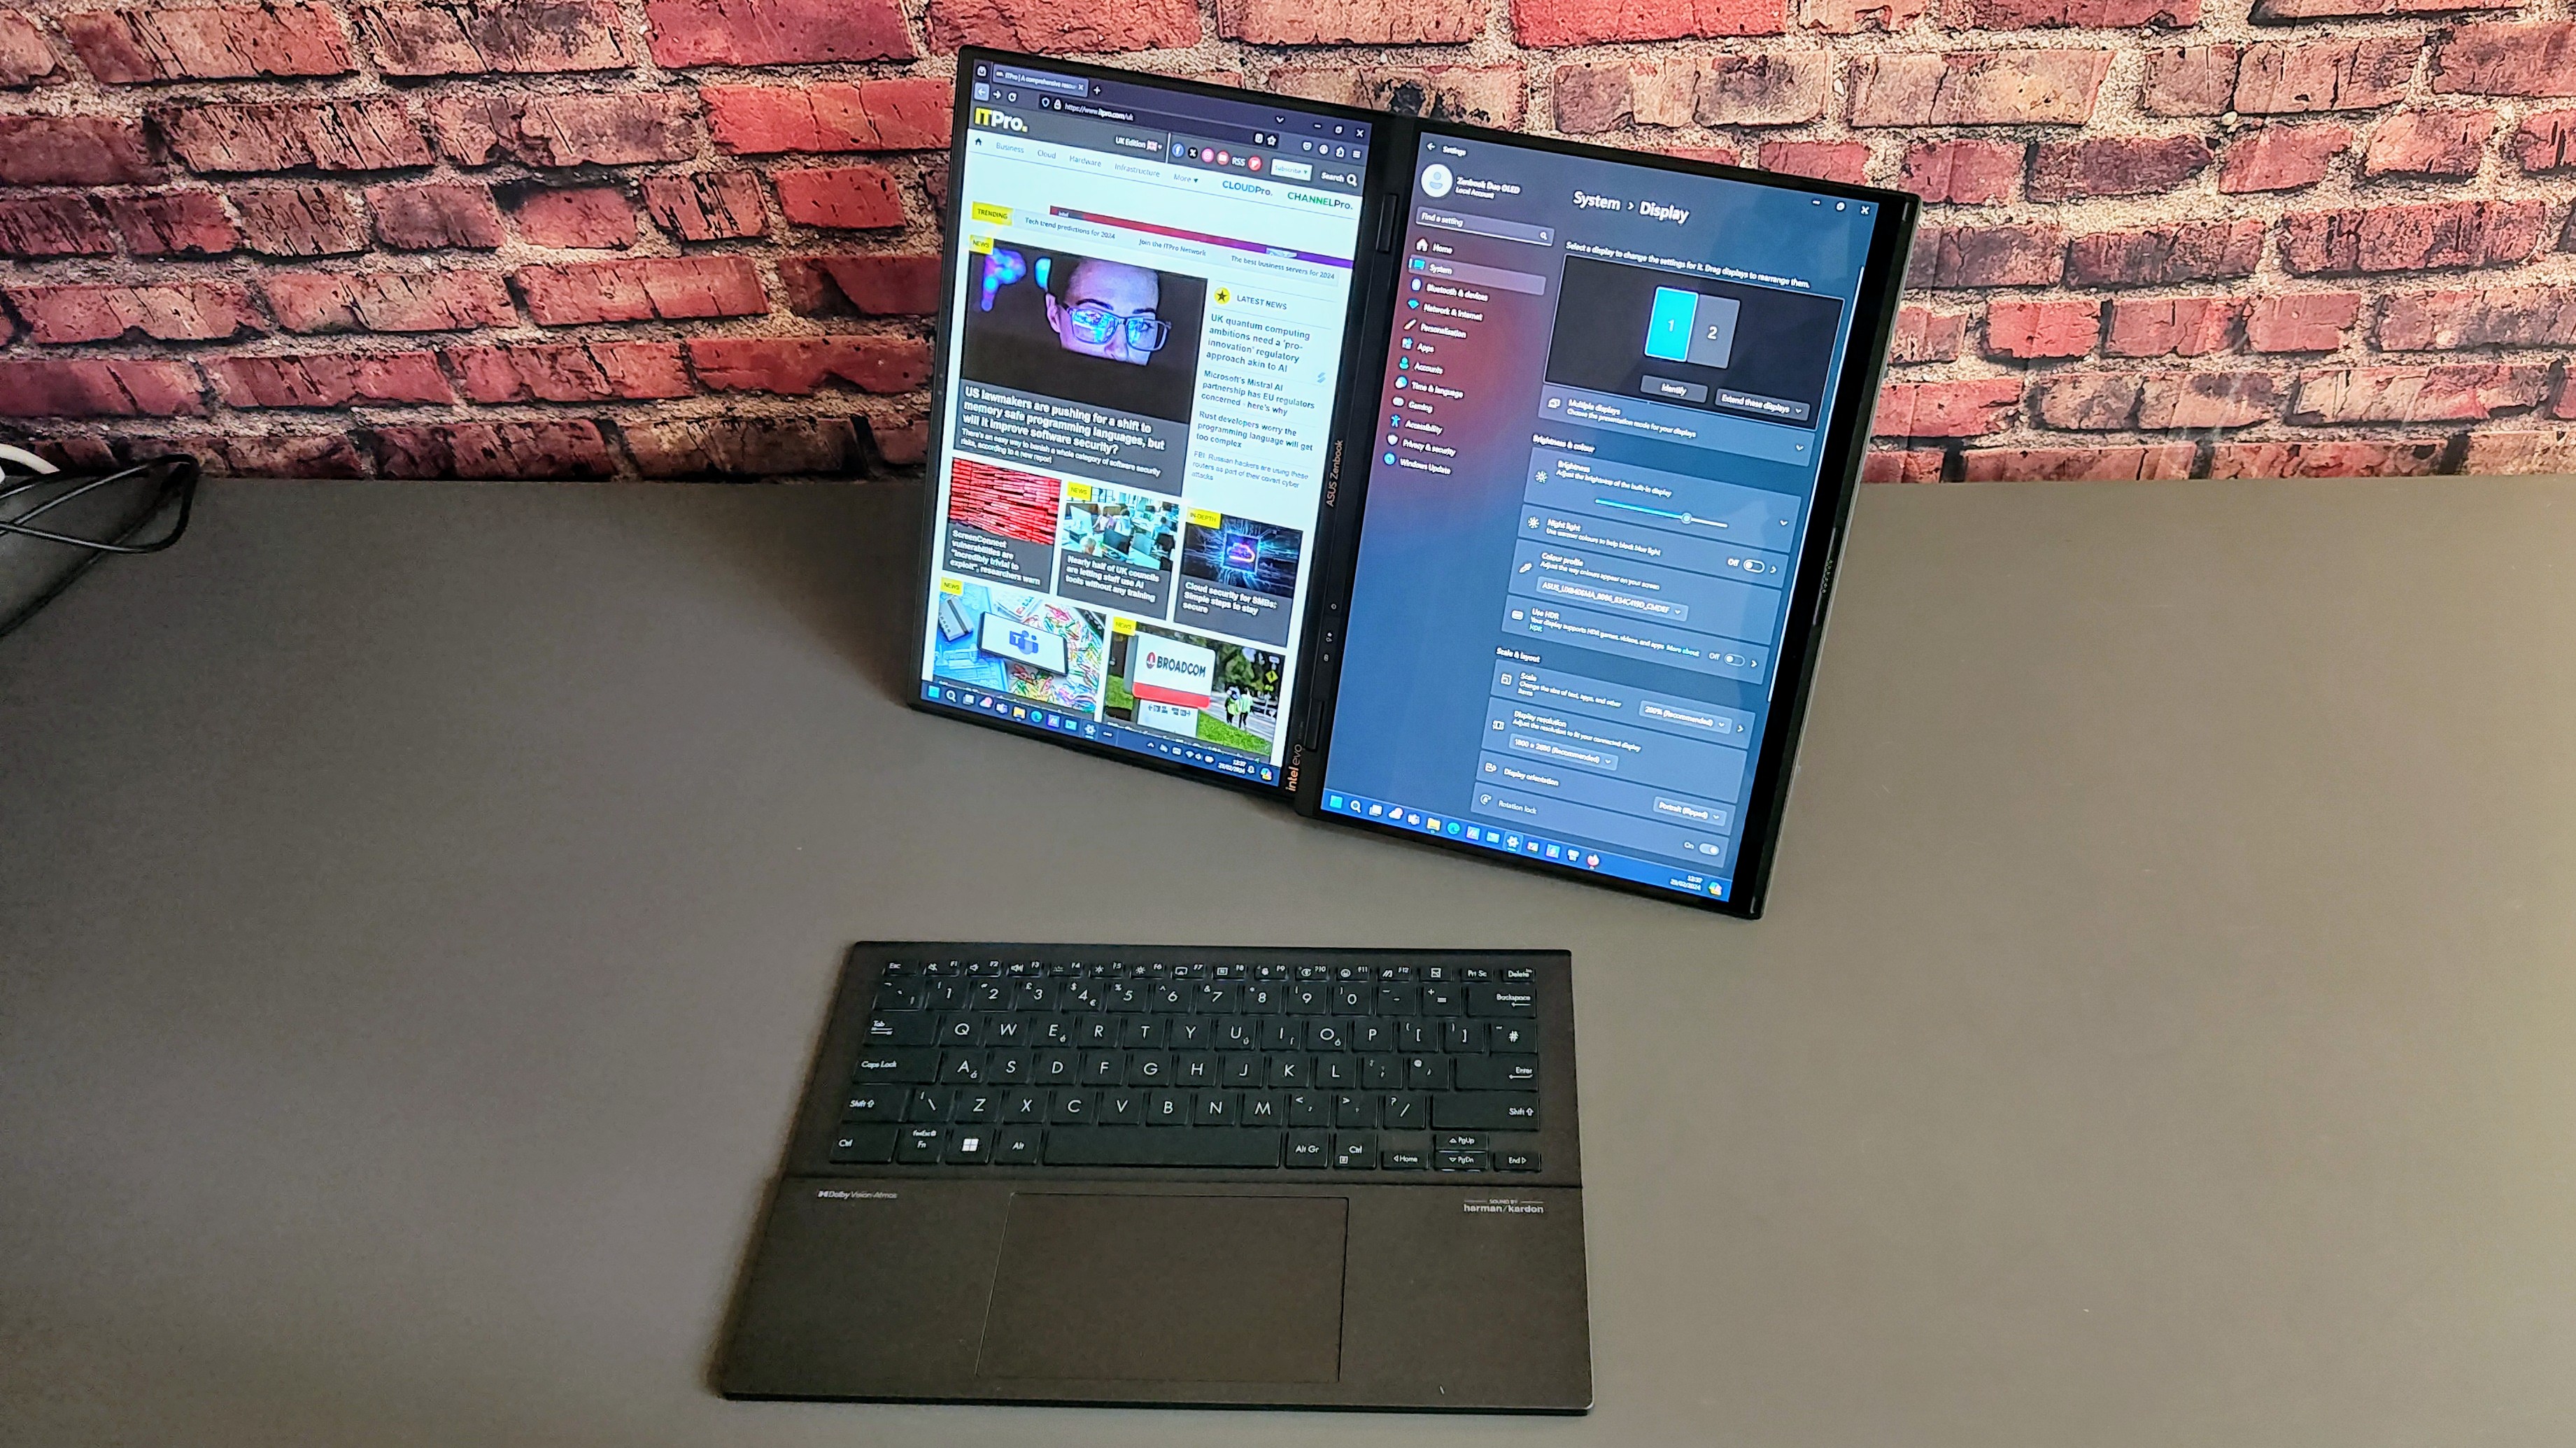 The Asus Zenbook Duo on a desk